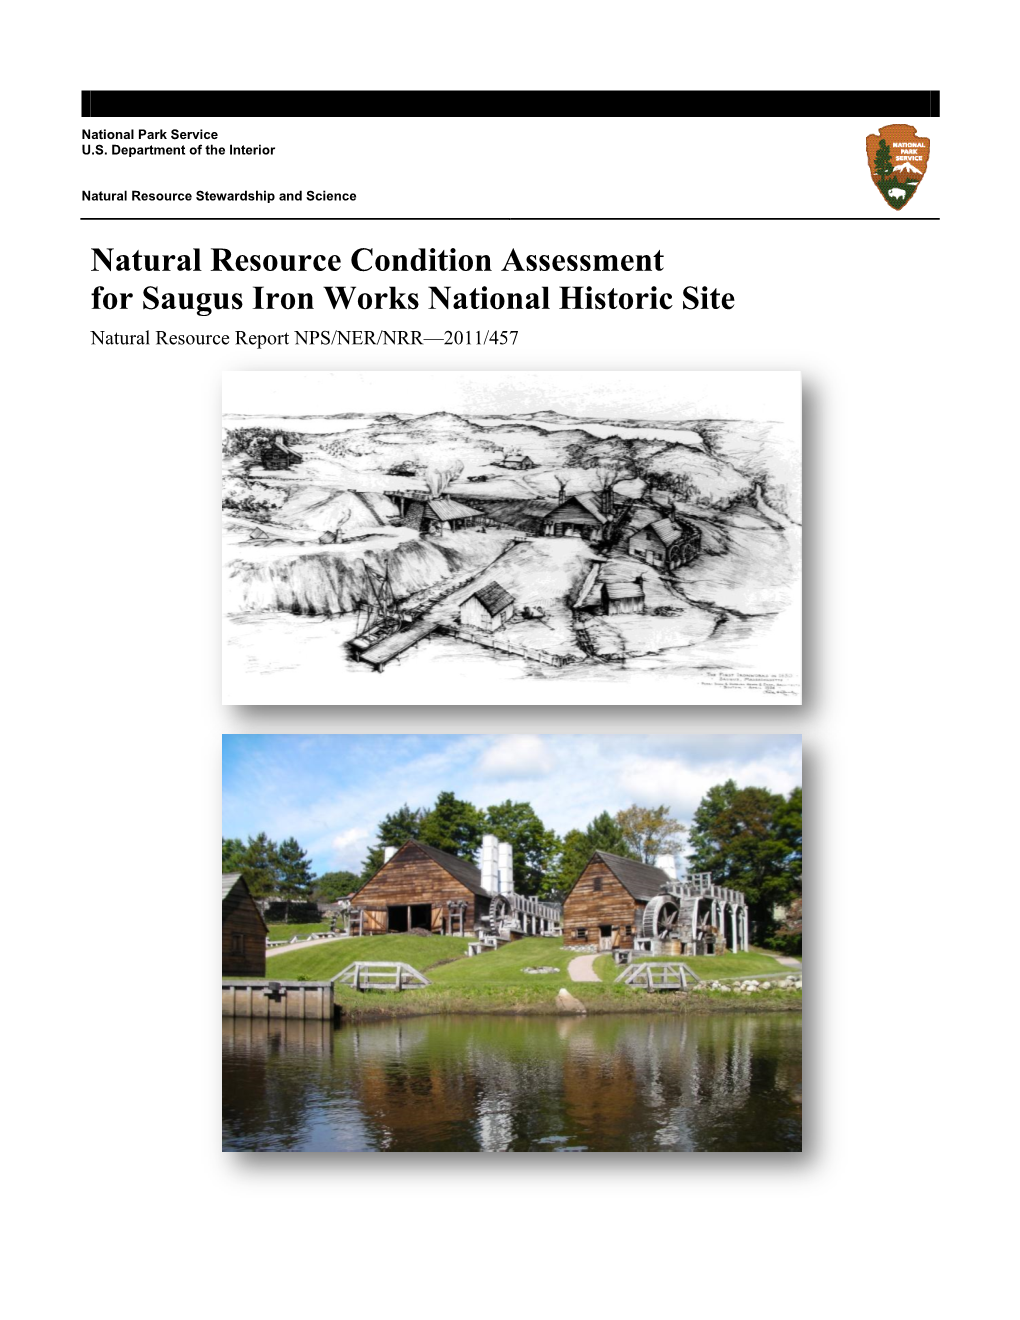 Natural Resource Condition Assessment for Saugus Iron Works National Historic Site Natural Resource Report NPS/NER/NRR—2011/457